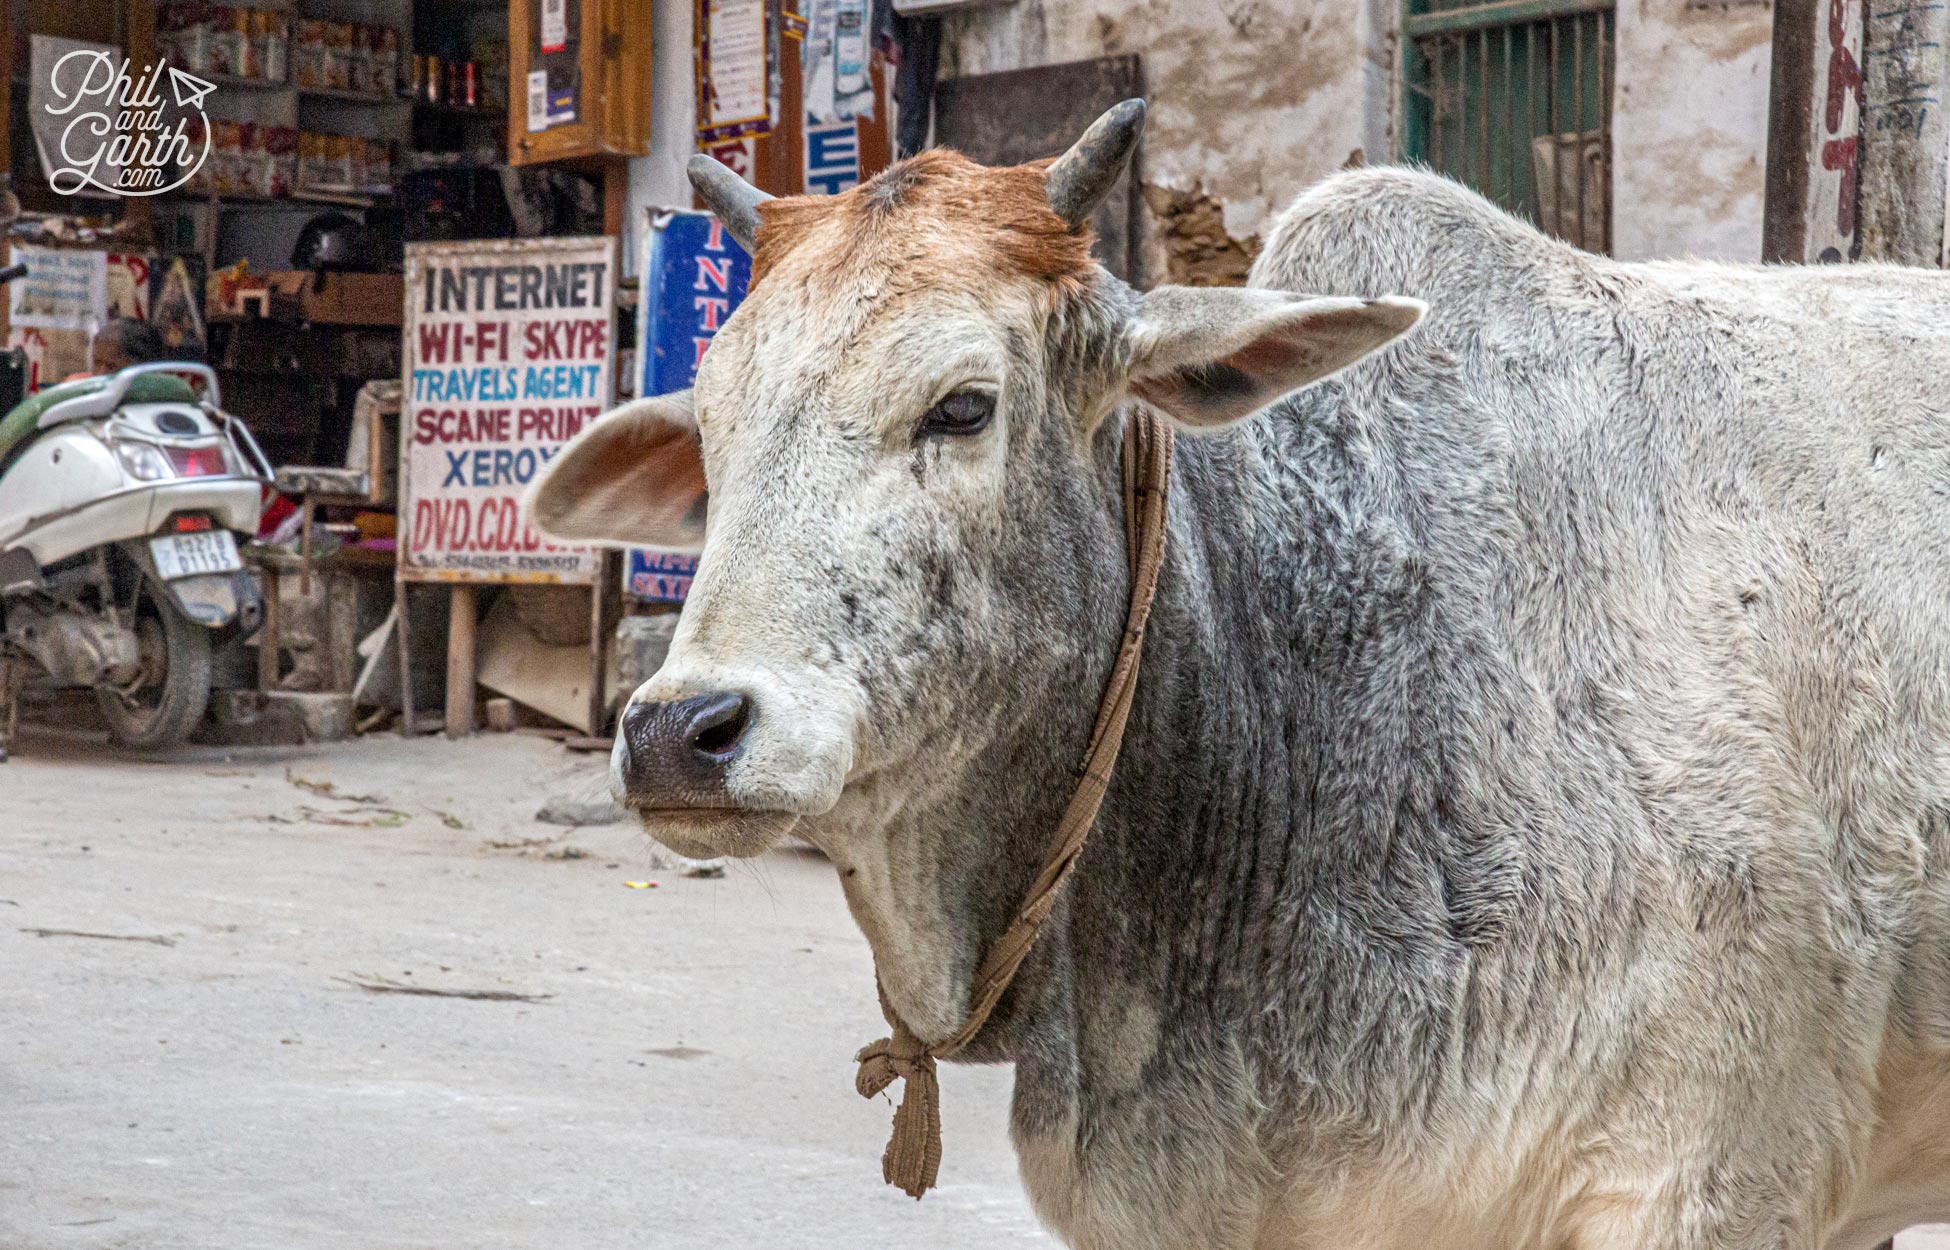 We saw more cows wandering the streets of Udaipur than any Indian city we visited